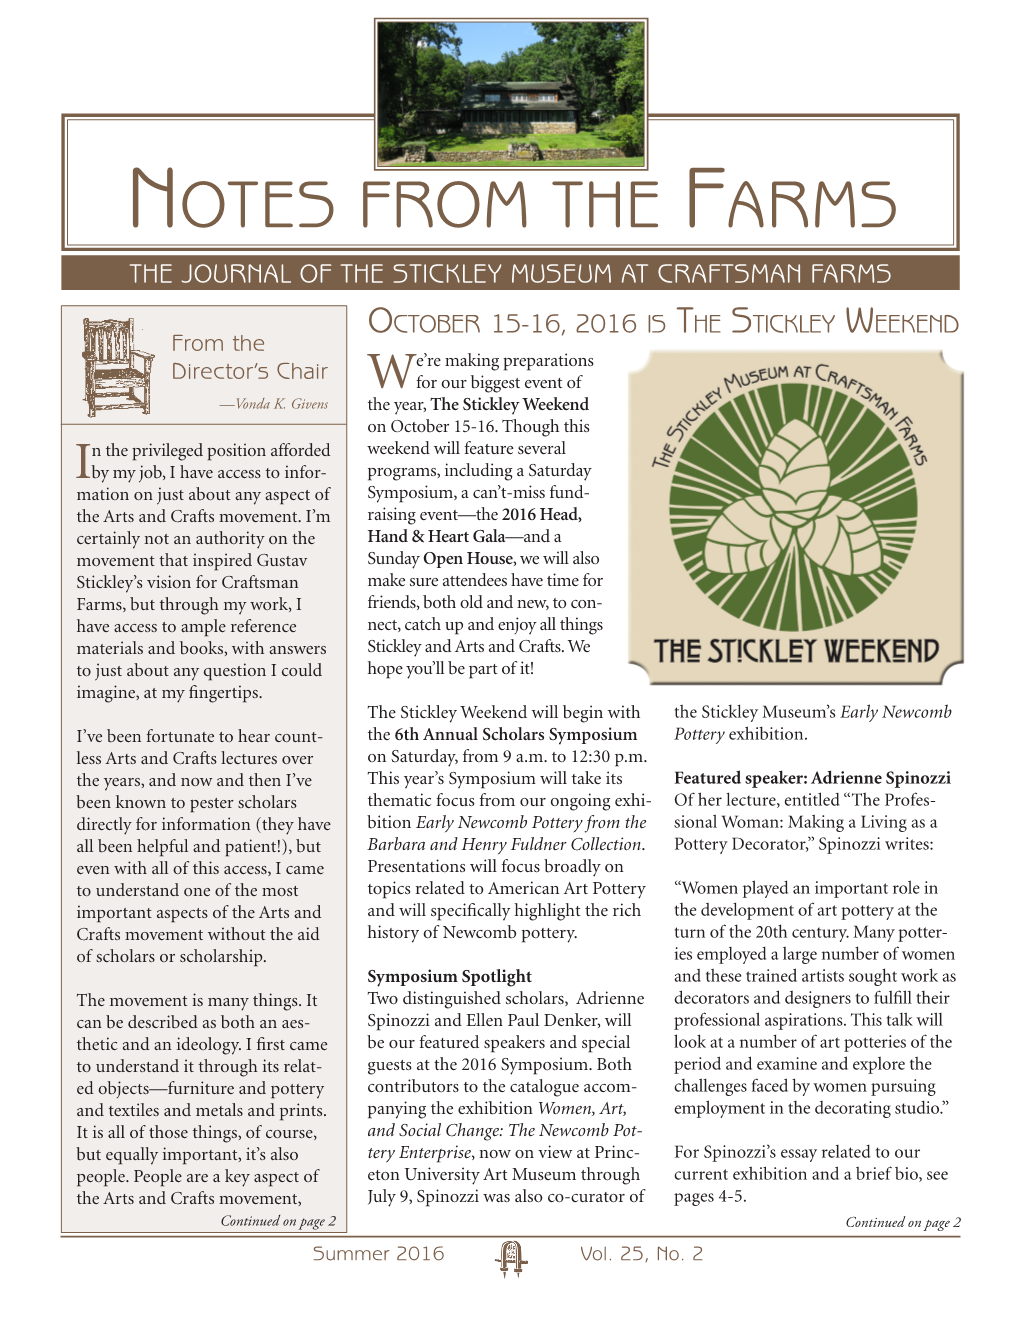 Notes from the Farms